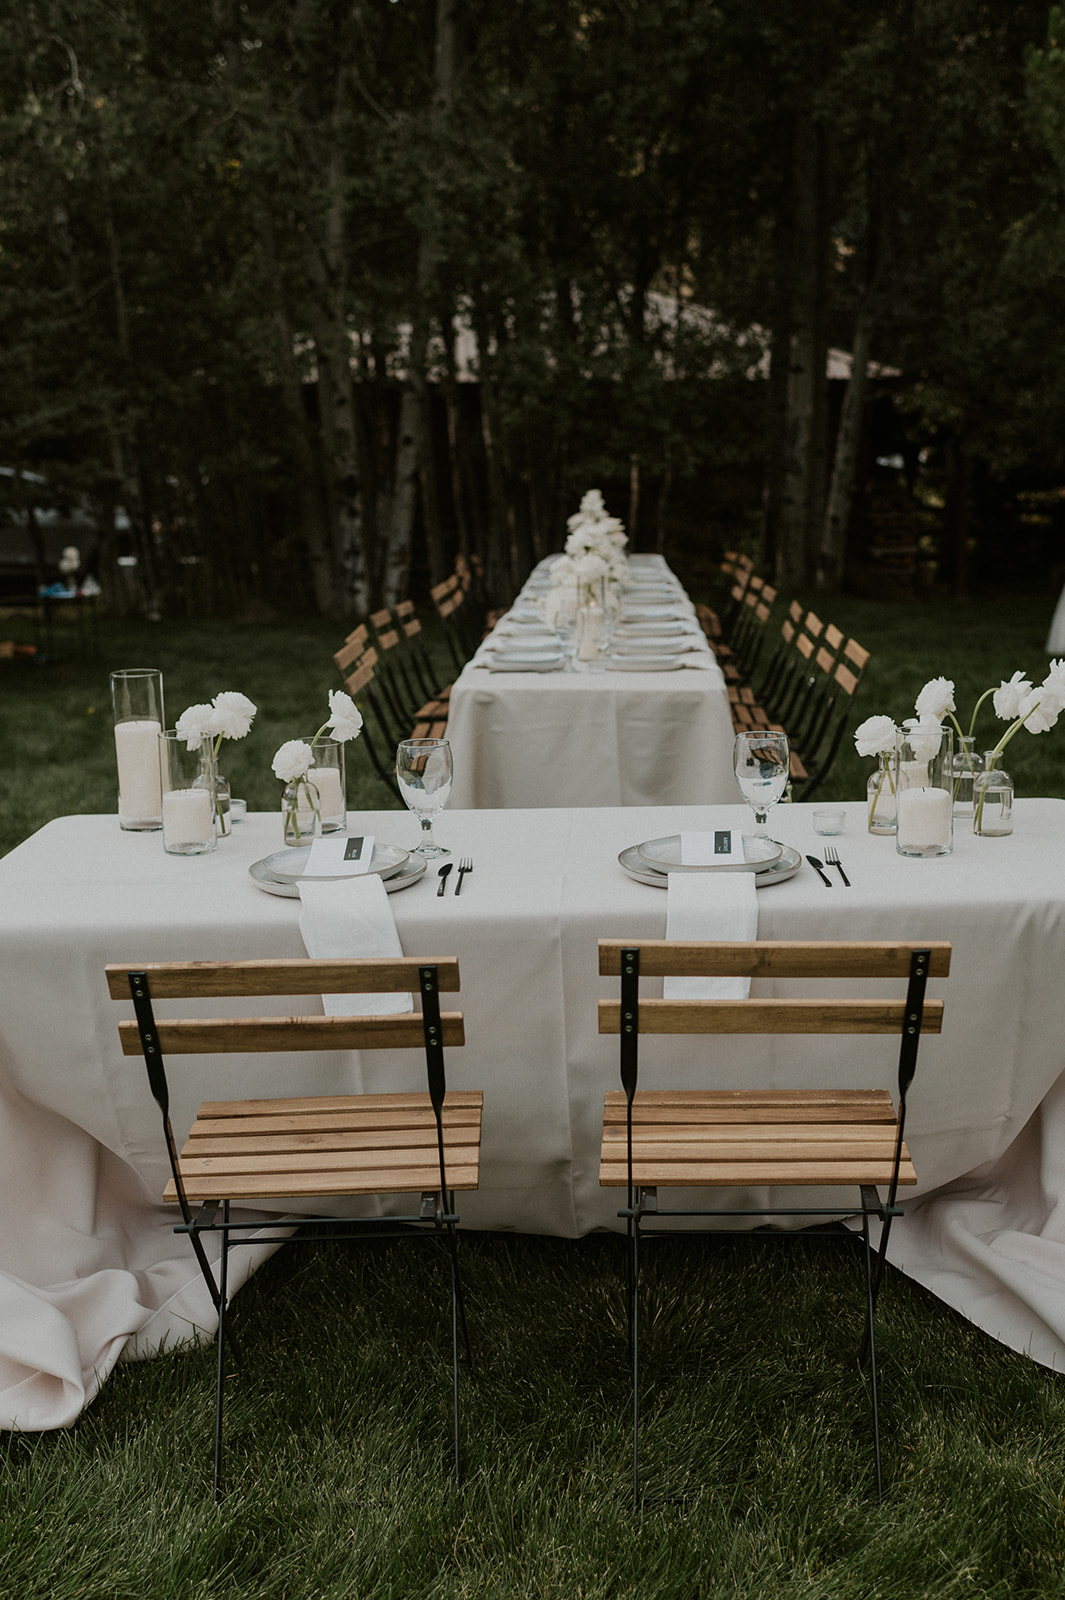 Modern and Monochromatic Wedding Table in Sun Valley Idaho. All white flowers and plates and silverware